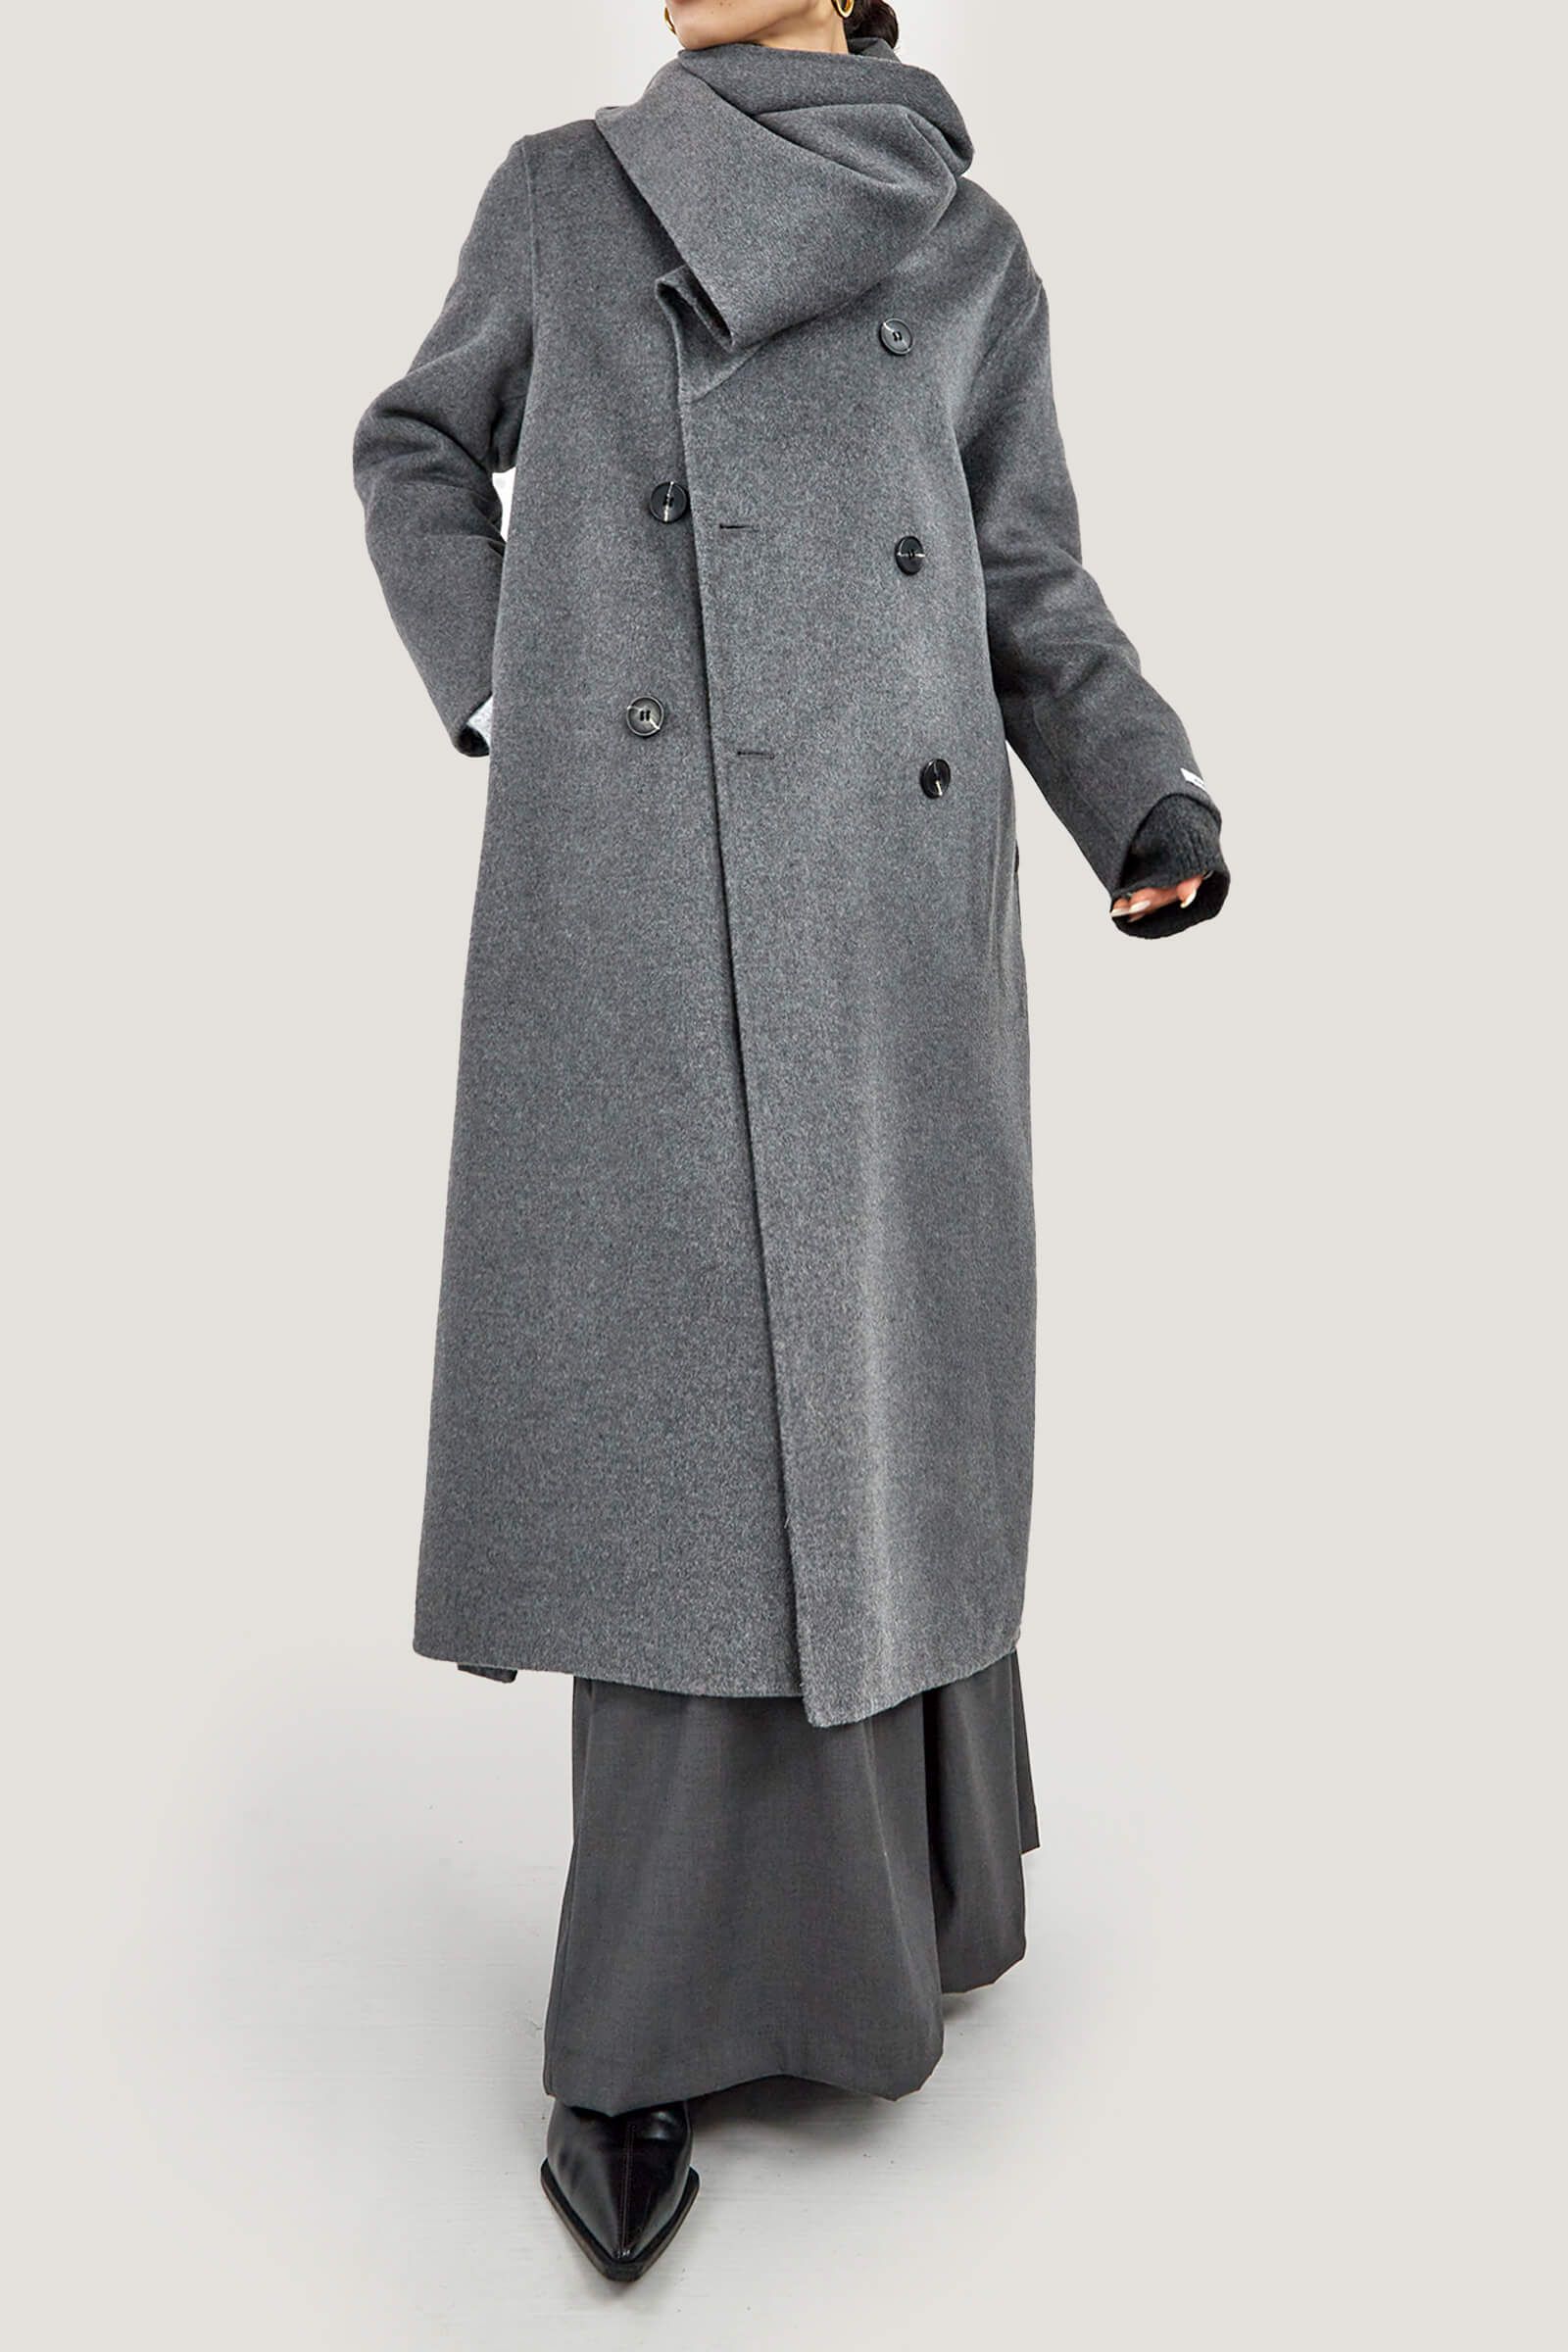 Dim Grey 100% Wool Long Double-Breasted Scarf Collar Coat | J.ING